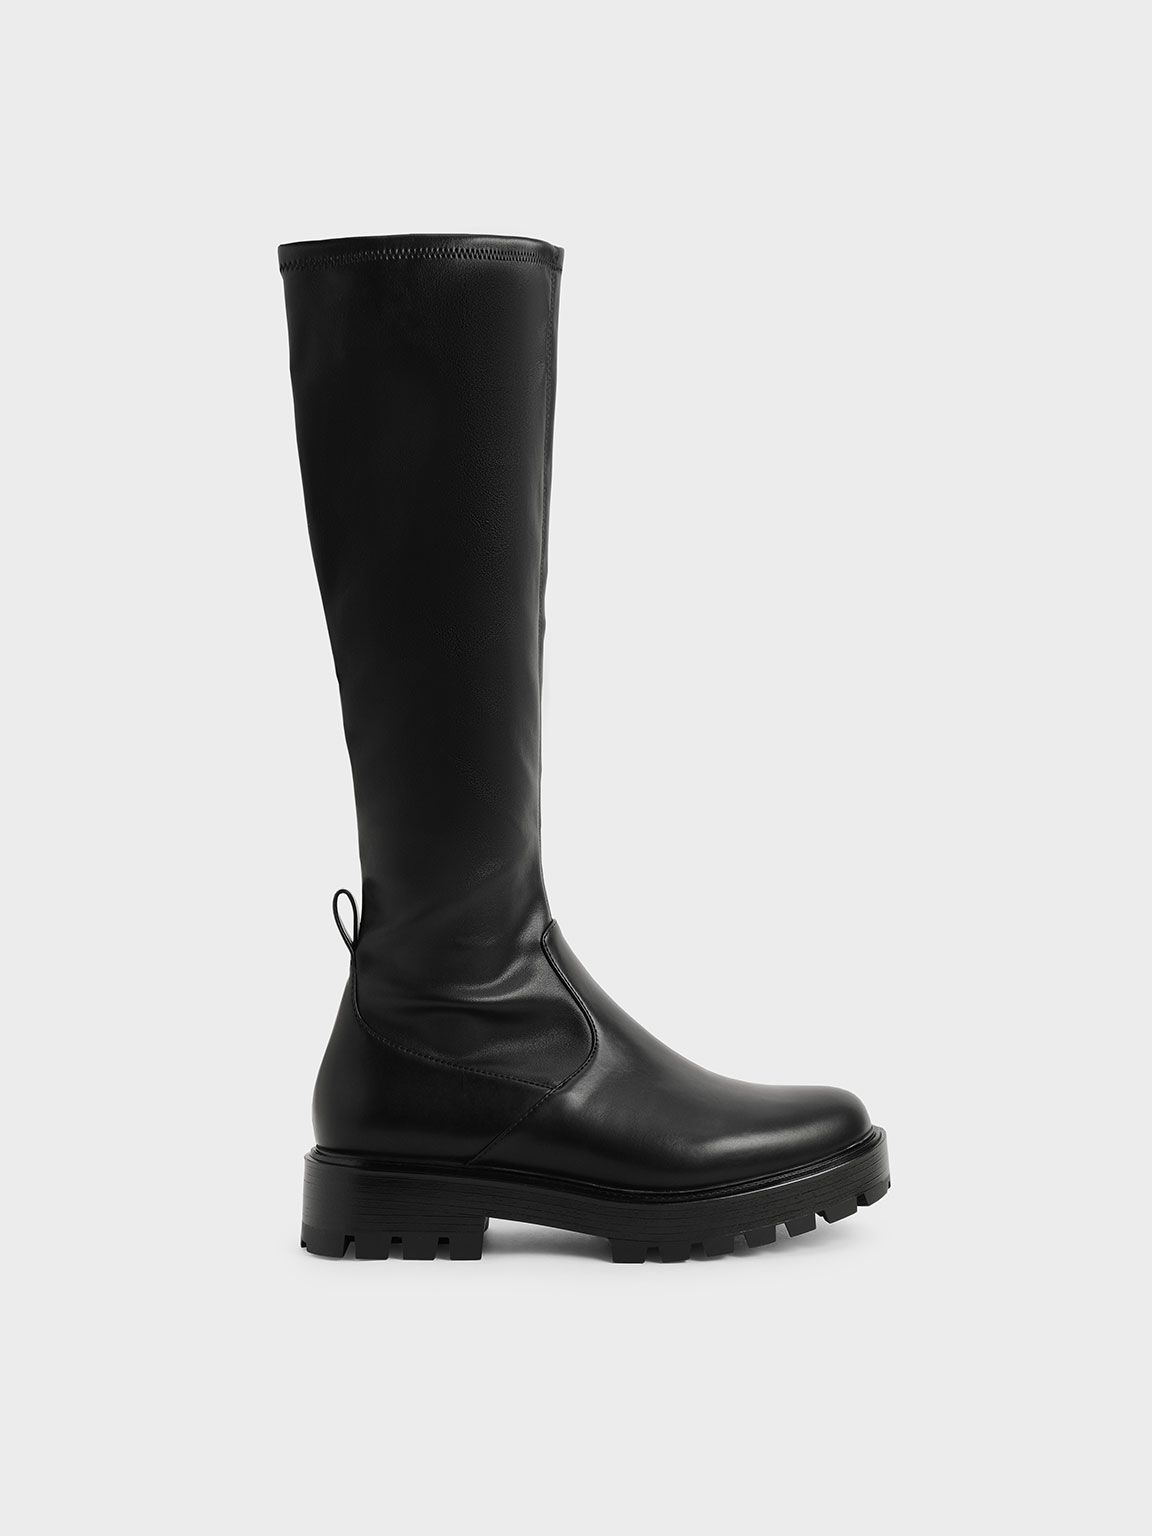 Black Knee-High Boots - CHARLES & KEITH US